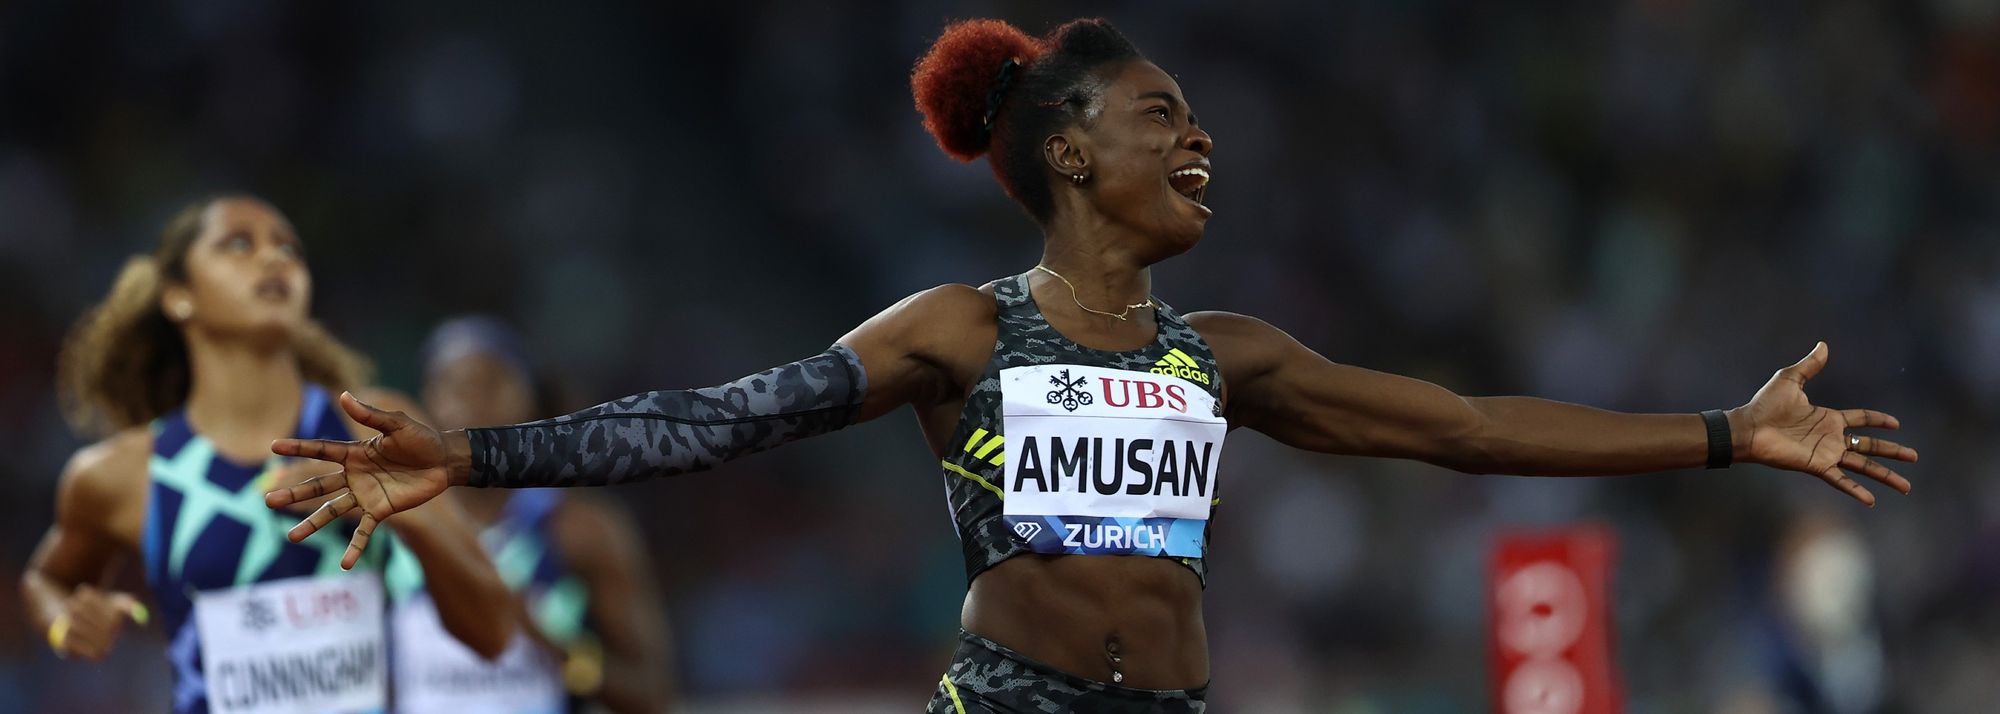 “I’ll come back stronger.” That was the promise Nigerian hurdler Tobi Amusan made to herself and her fans after placing fourth in the 100m hurdles at the Tokyo Olympics.